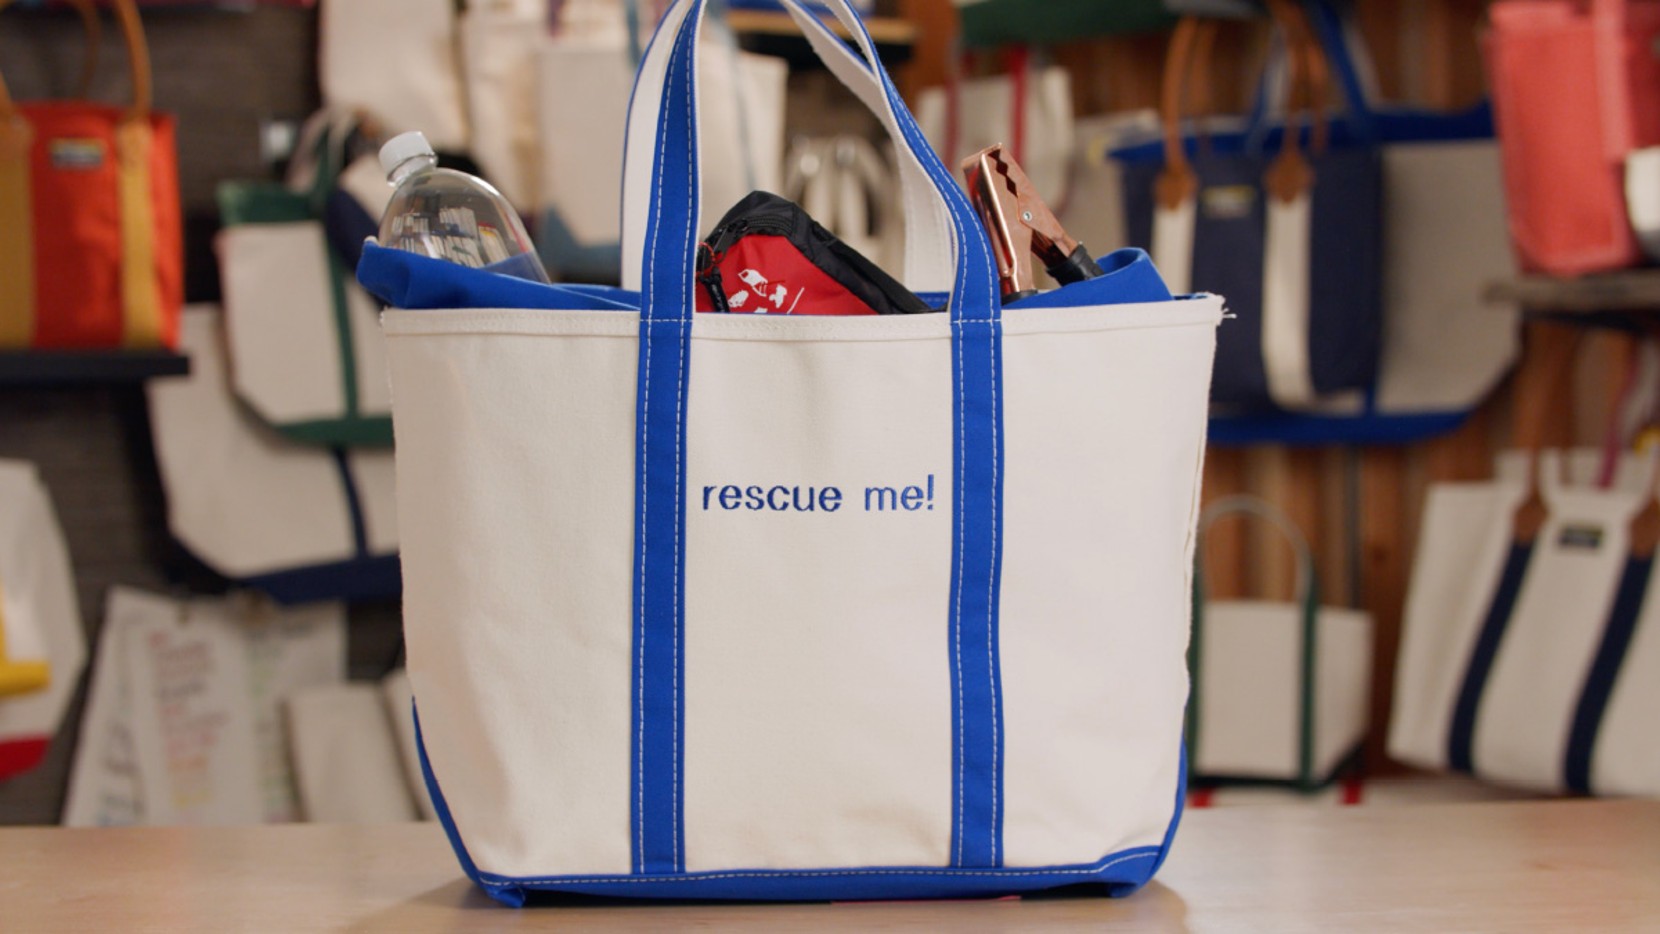 A large Boat & Tote with royal blue handles and monogram - "rescue me!", filled with emergency items for the car.